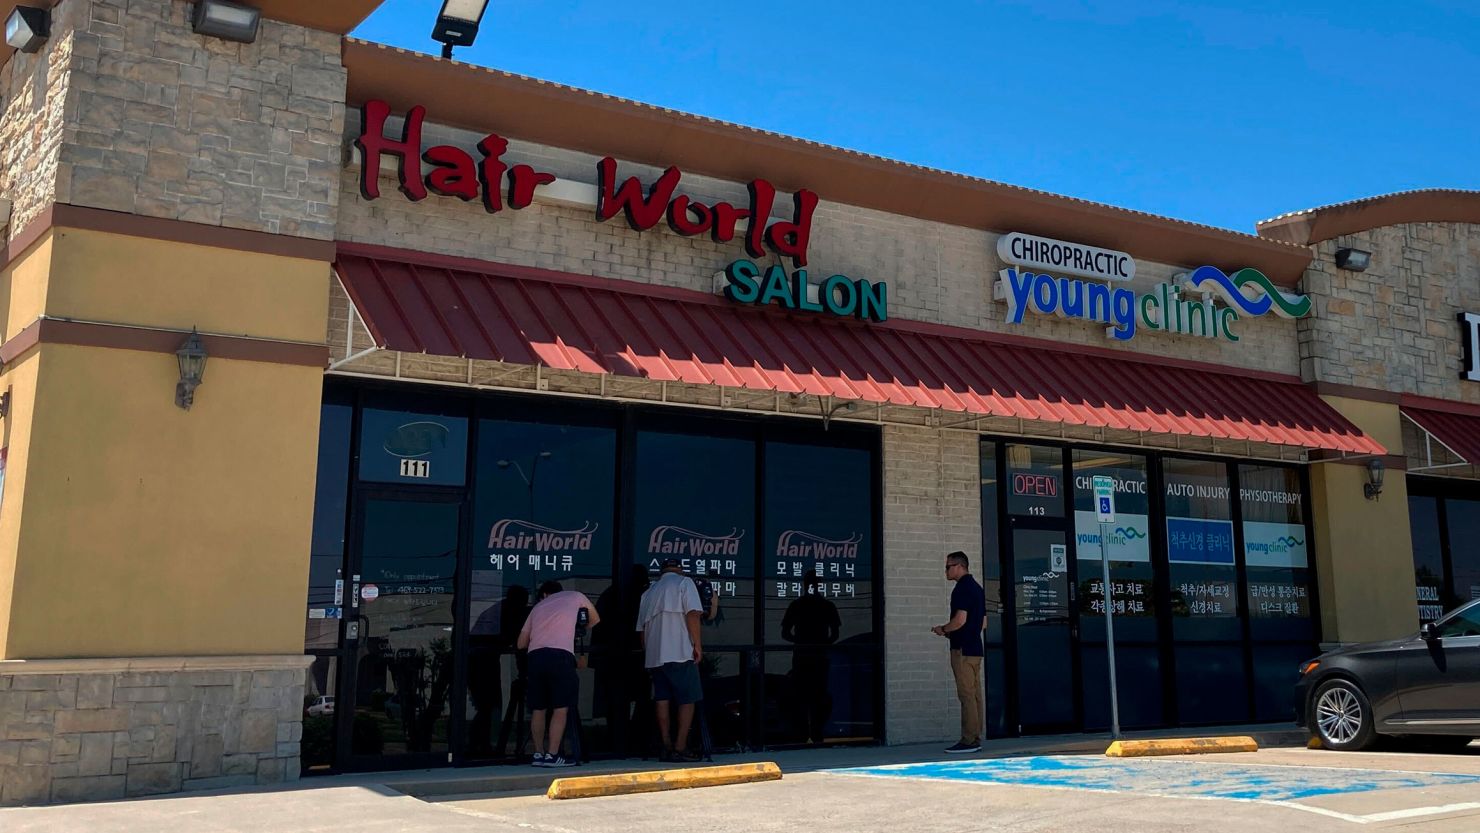 The shooting happened at Hair World Salon in Dallas, which is in a shopping center with many businesses owned by Korean Americans.